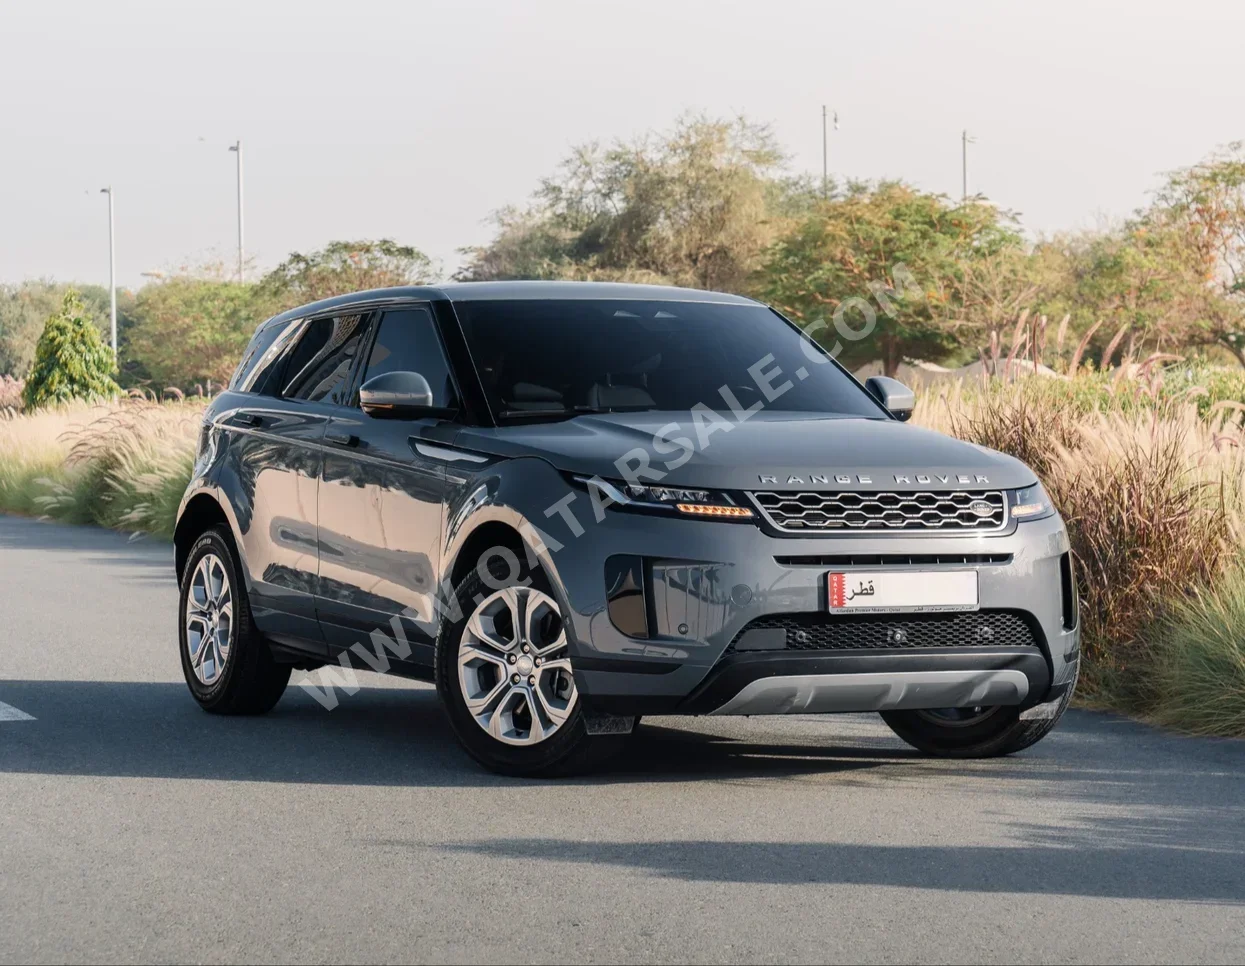 Land Rover  Evoque  Dynamic  2020  Automatic  40,000 Km  4 Cylinder  Four Wheel Drive (4WD)  SUV  Gray